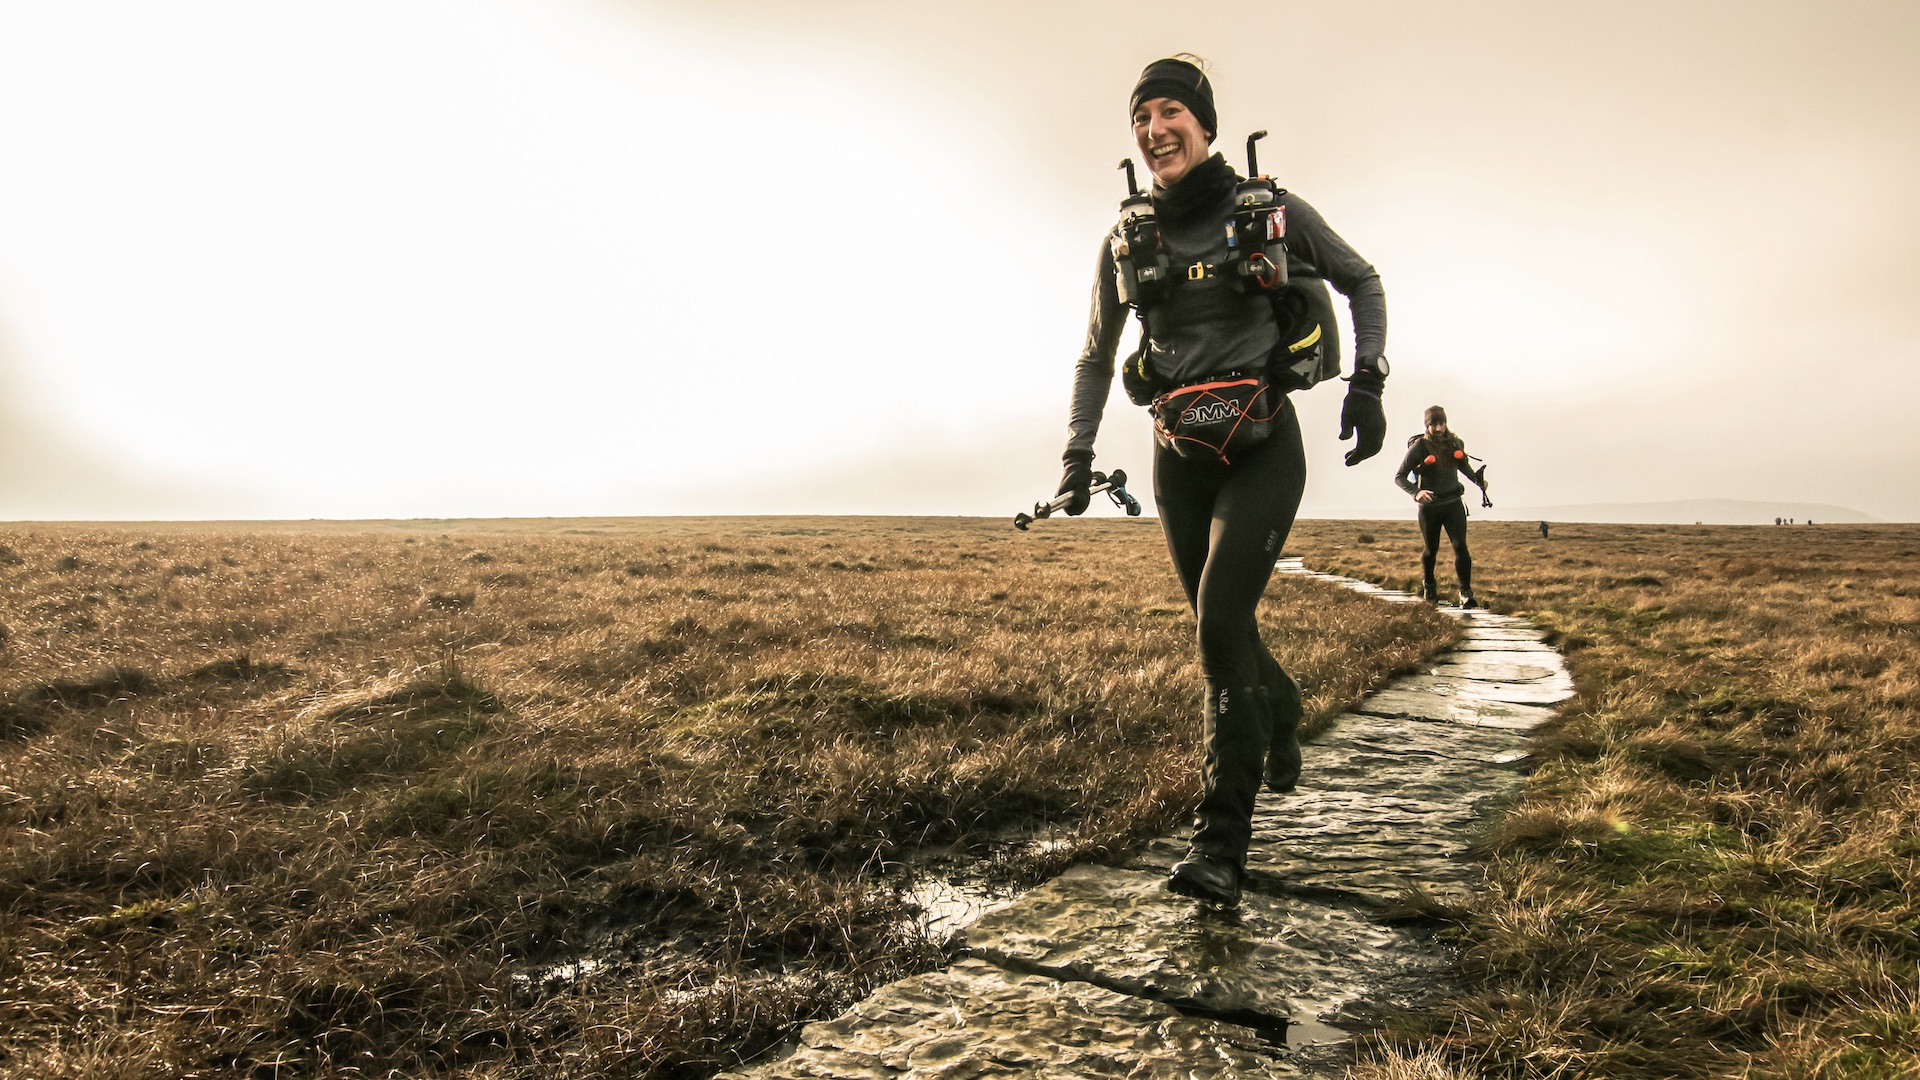 Montane Spine Race launches two new ultra running events | Advnture